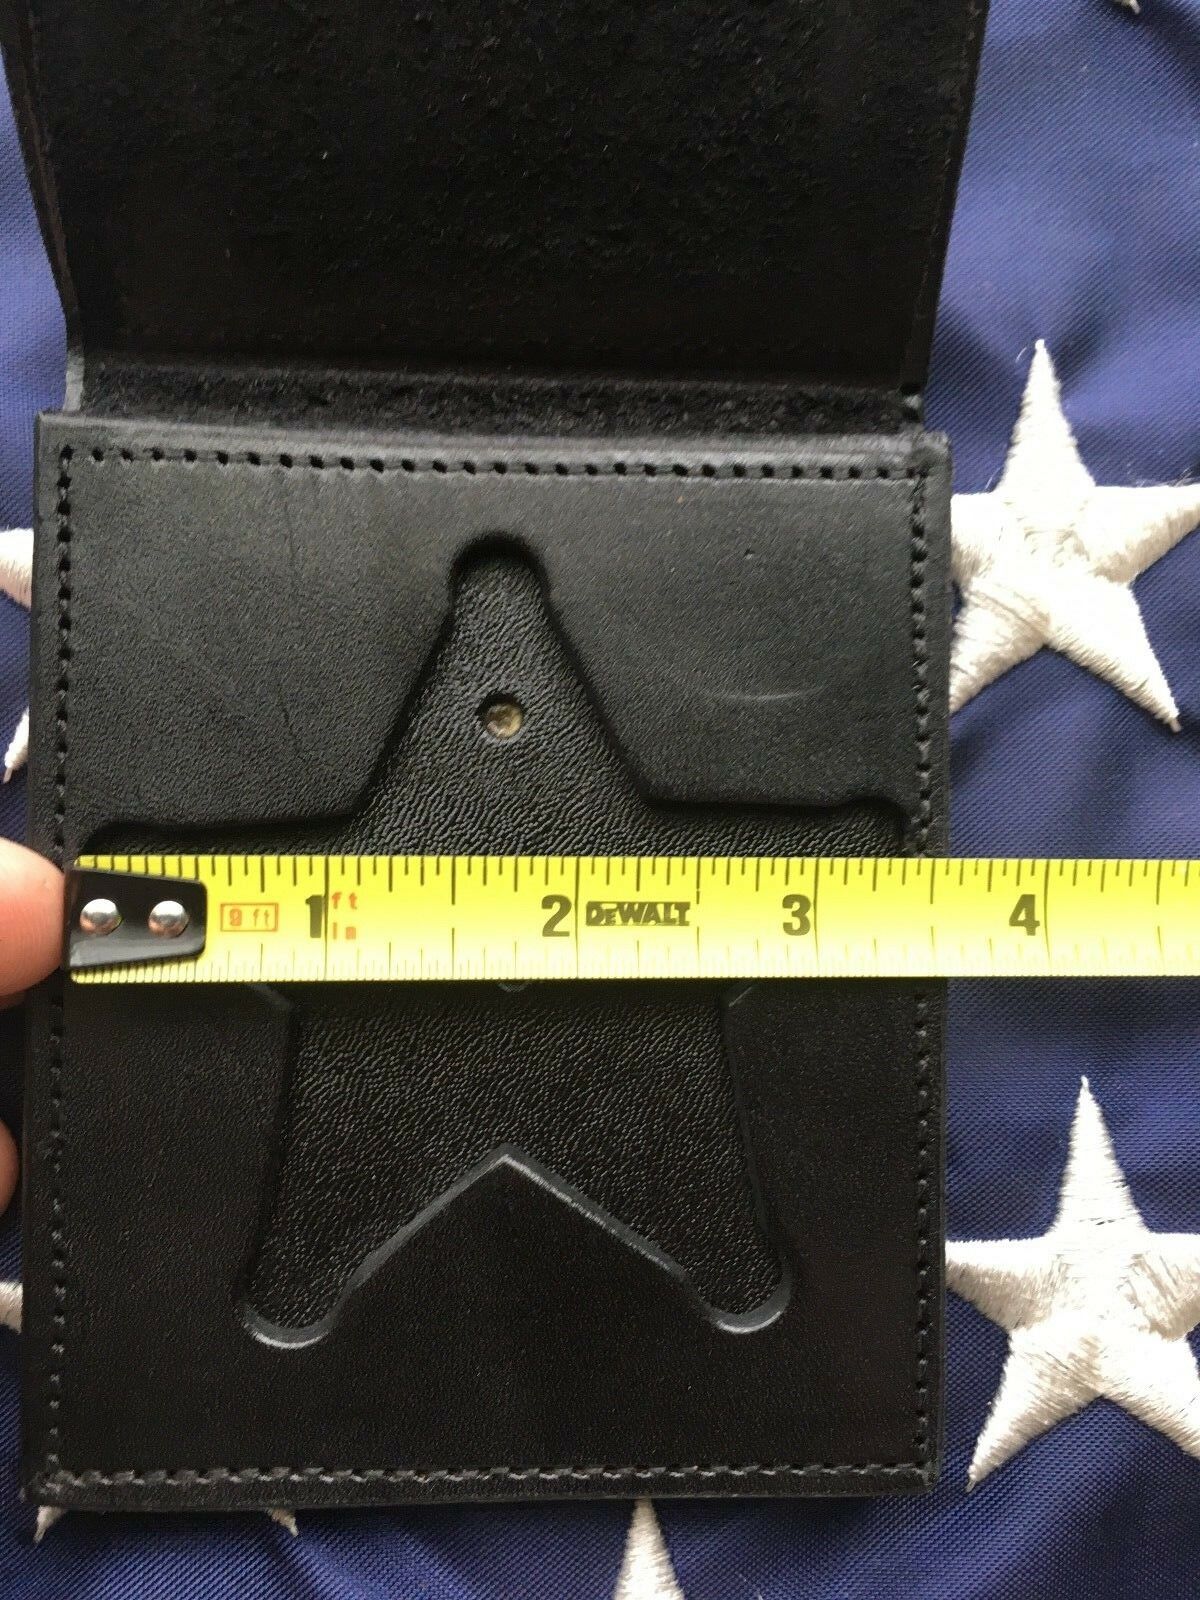 Vintage Tex Shoemaker 5 Point Star Sheriff Police Badge ID Wallet